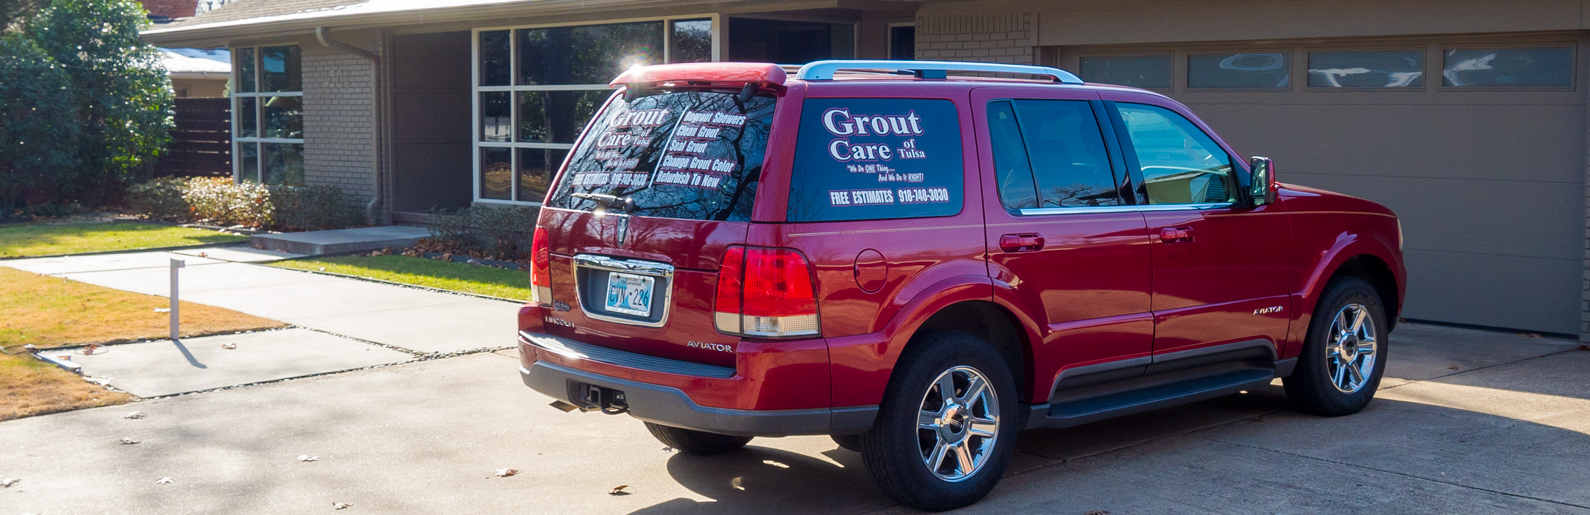 Grout Care Of Tulsa Service Vehicle